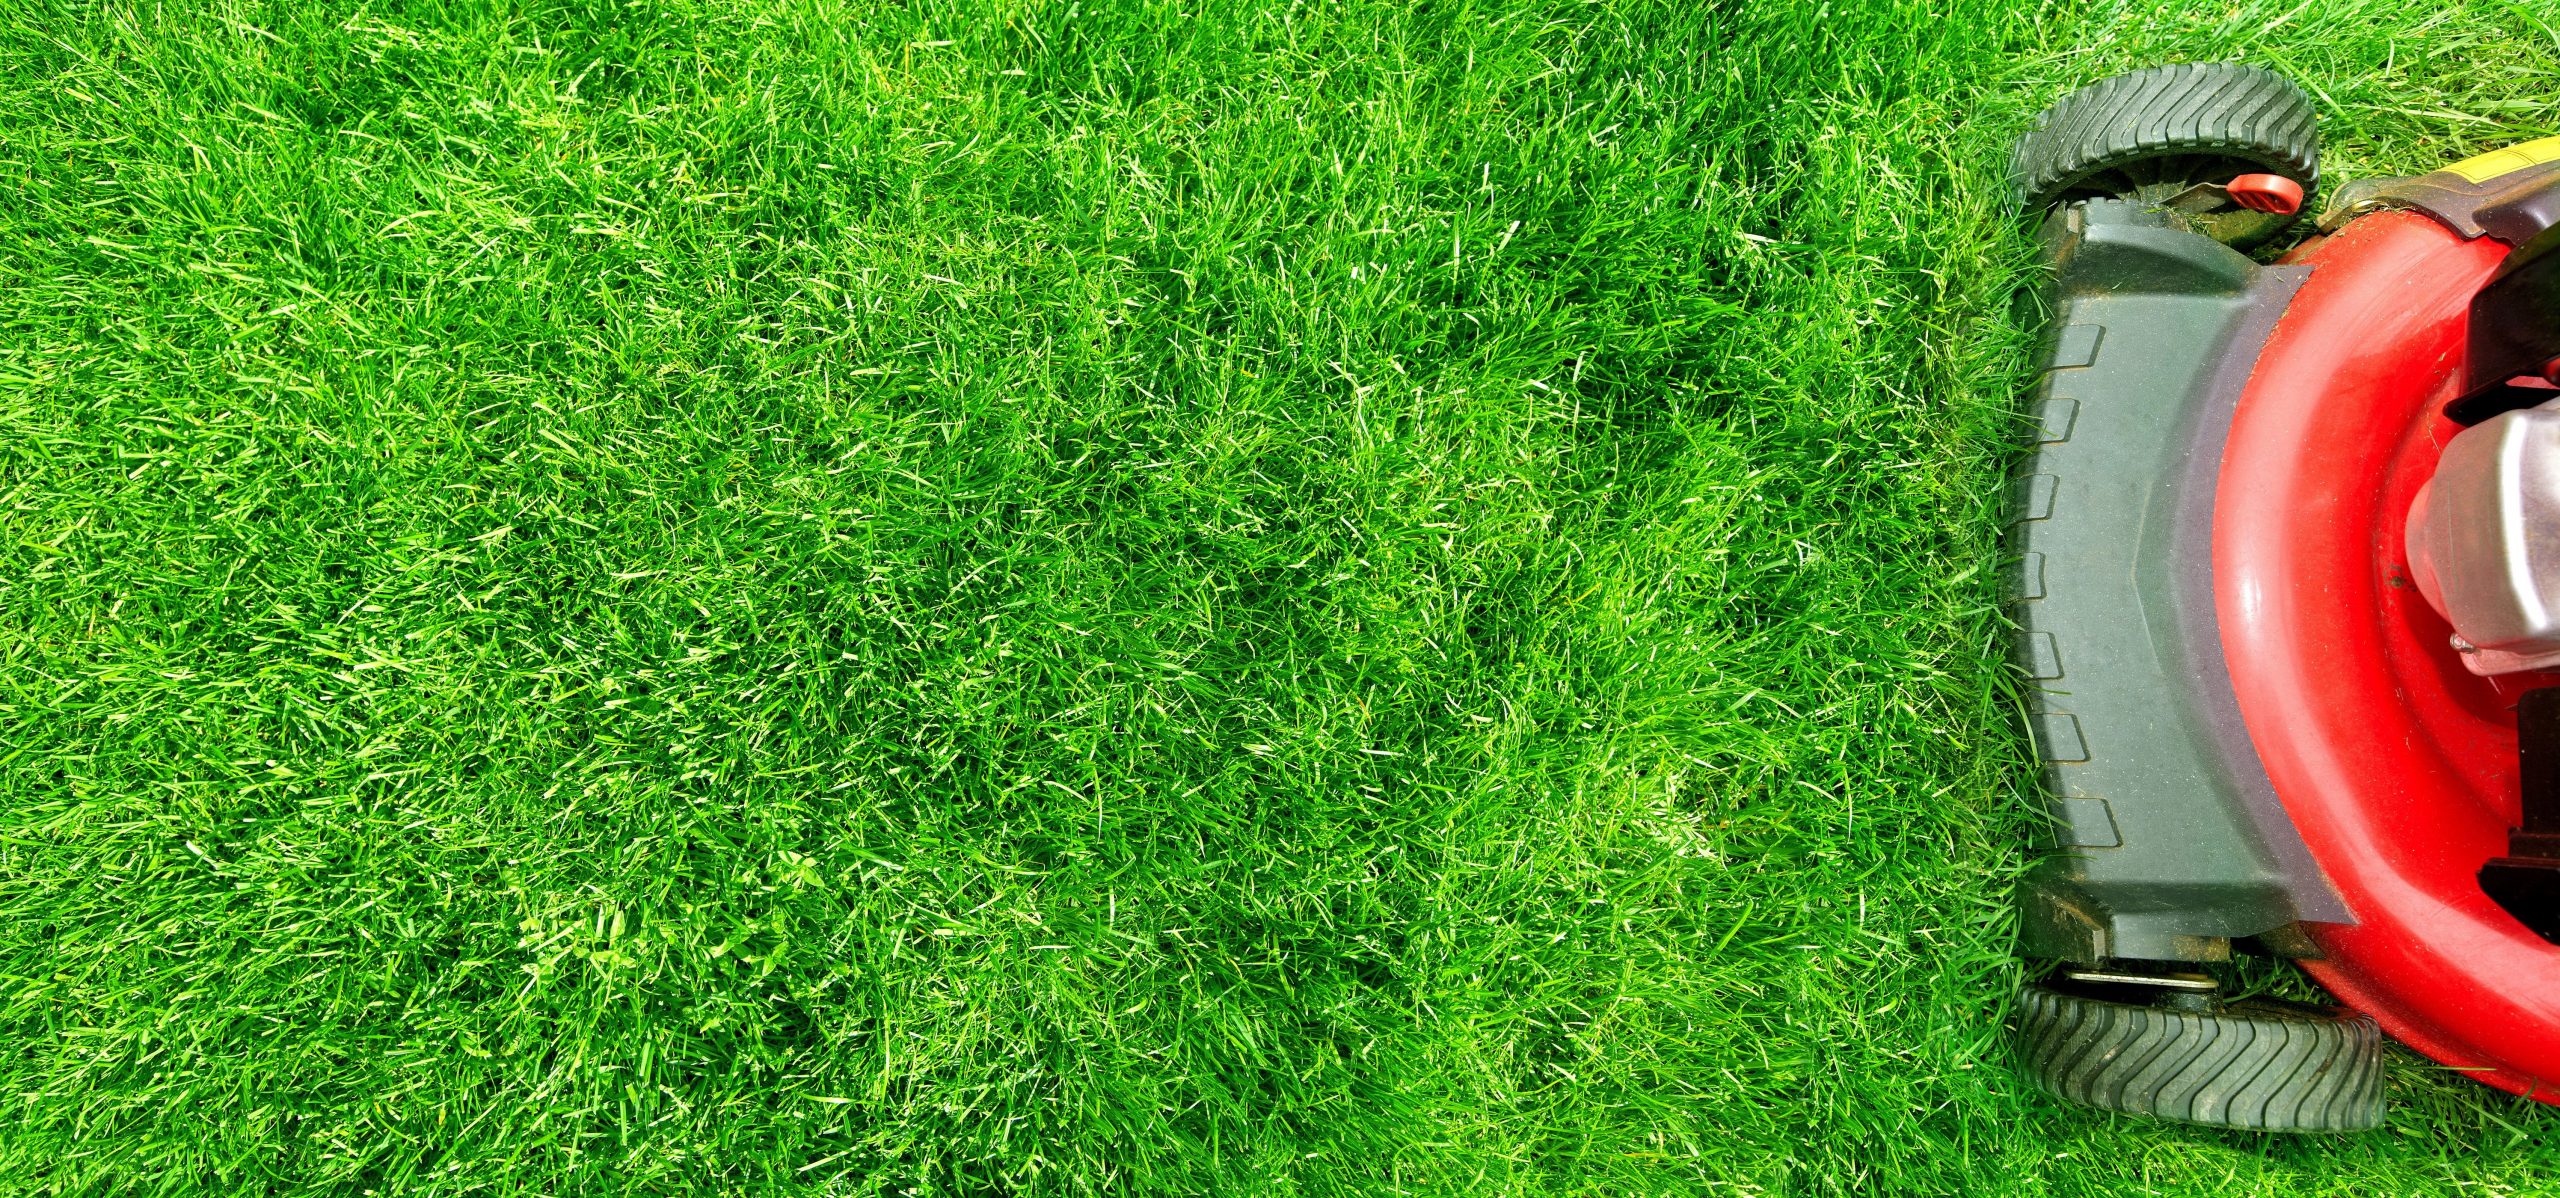 Why Fertilizer is Important for Lawn Health